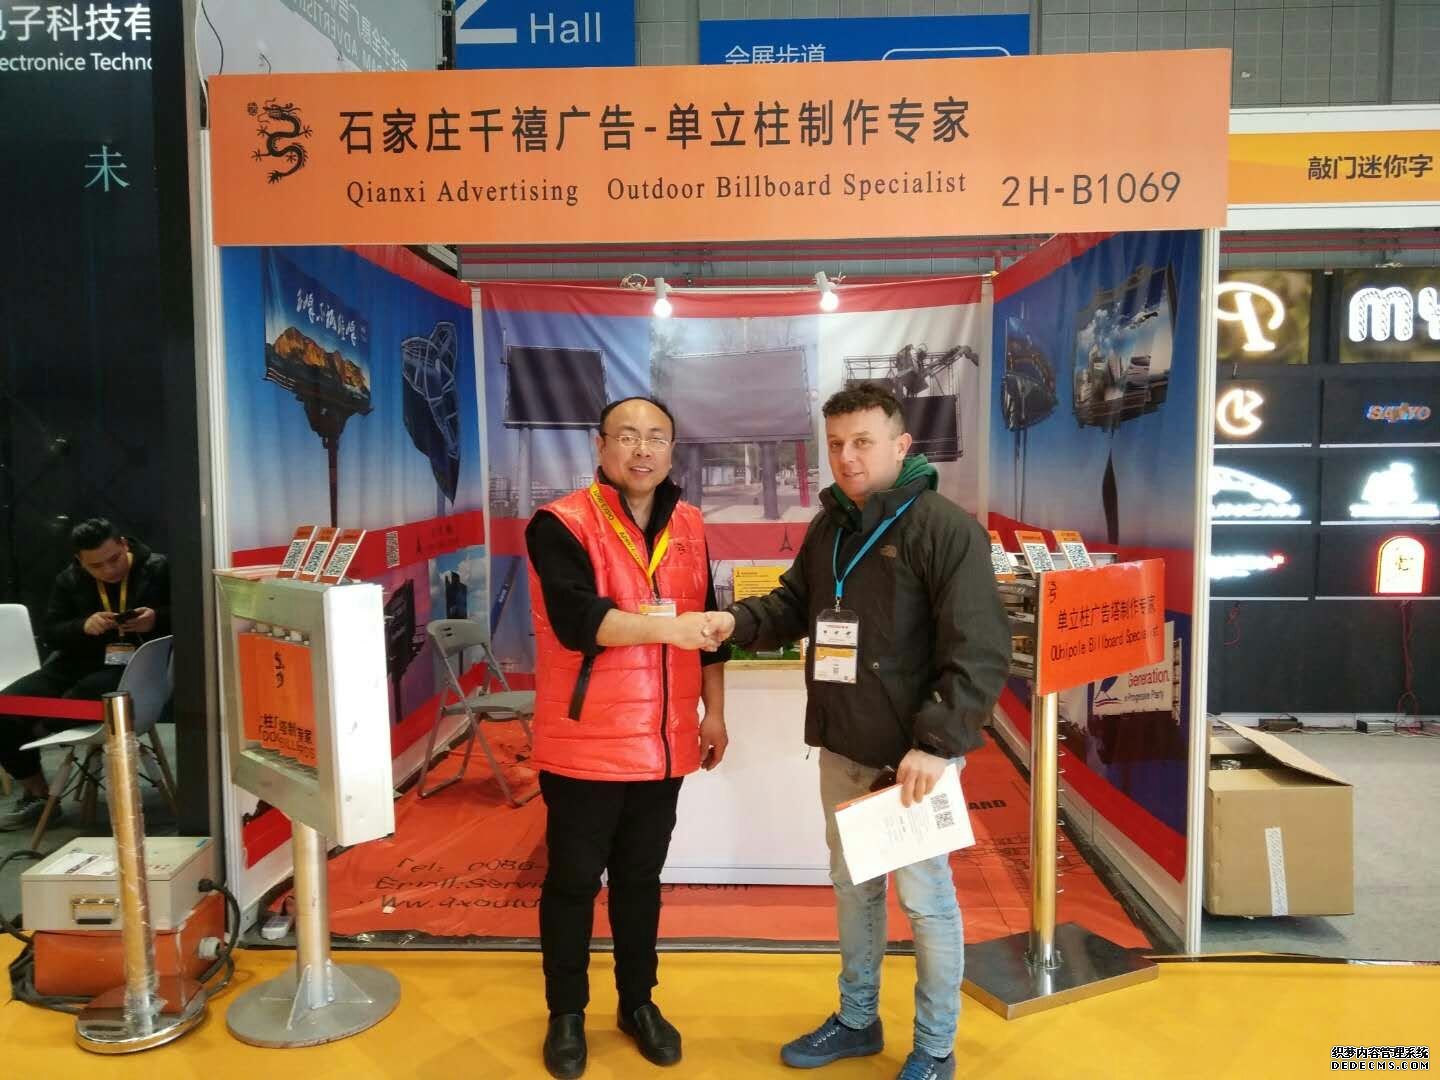 QIANXI ADVERTISING ATTEND APPP EXPO